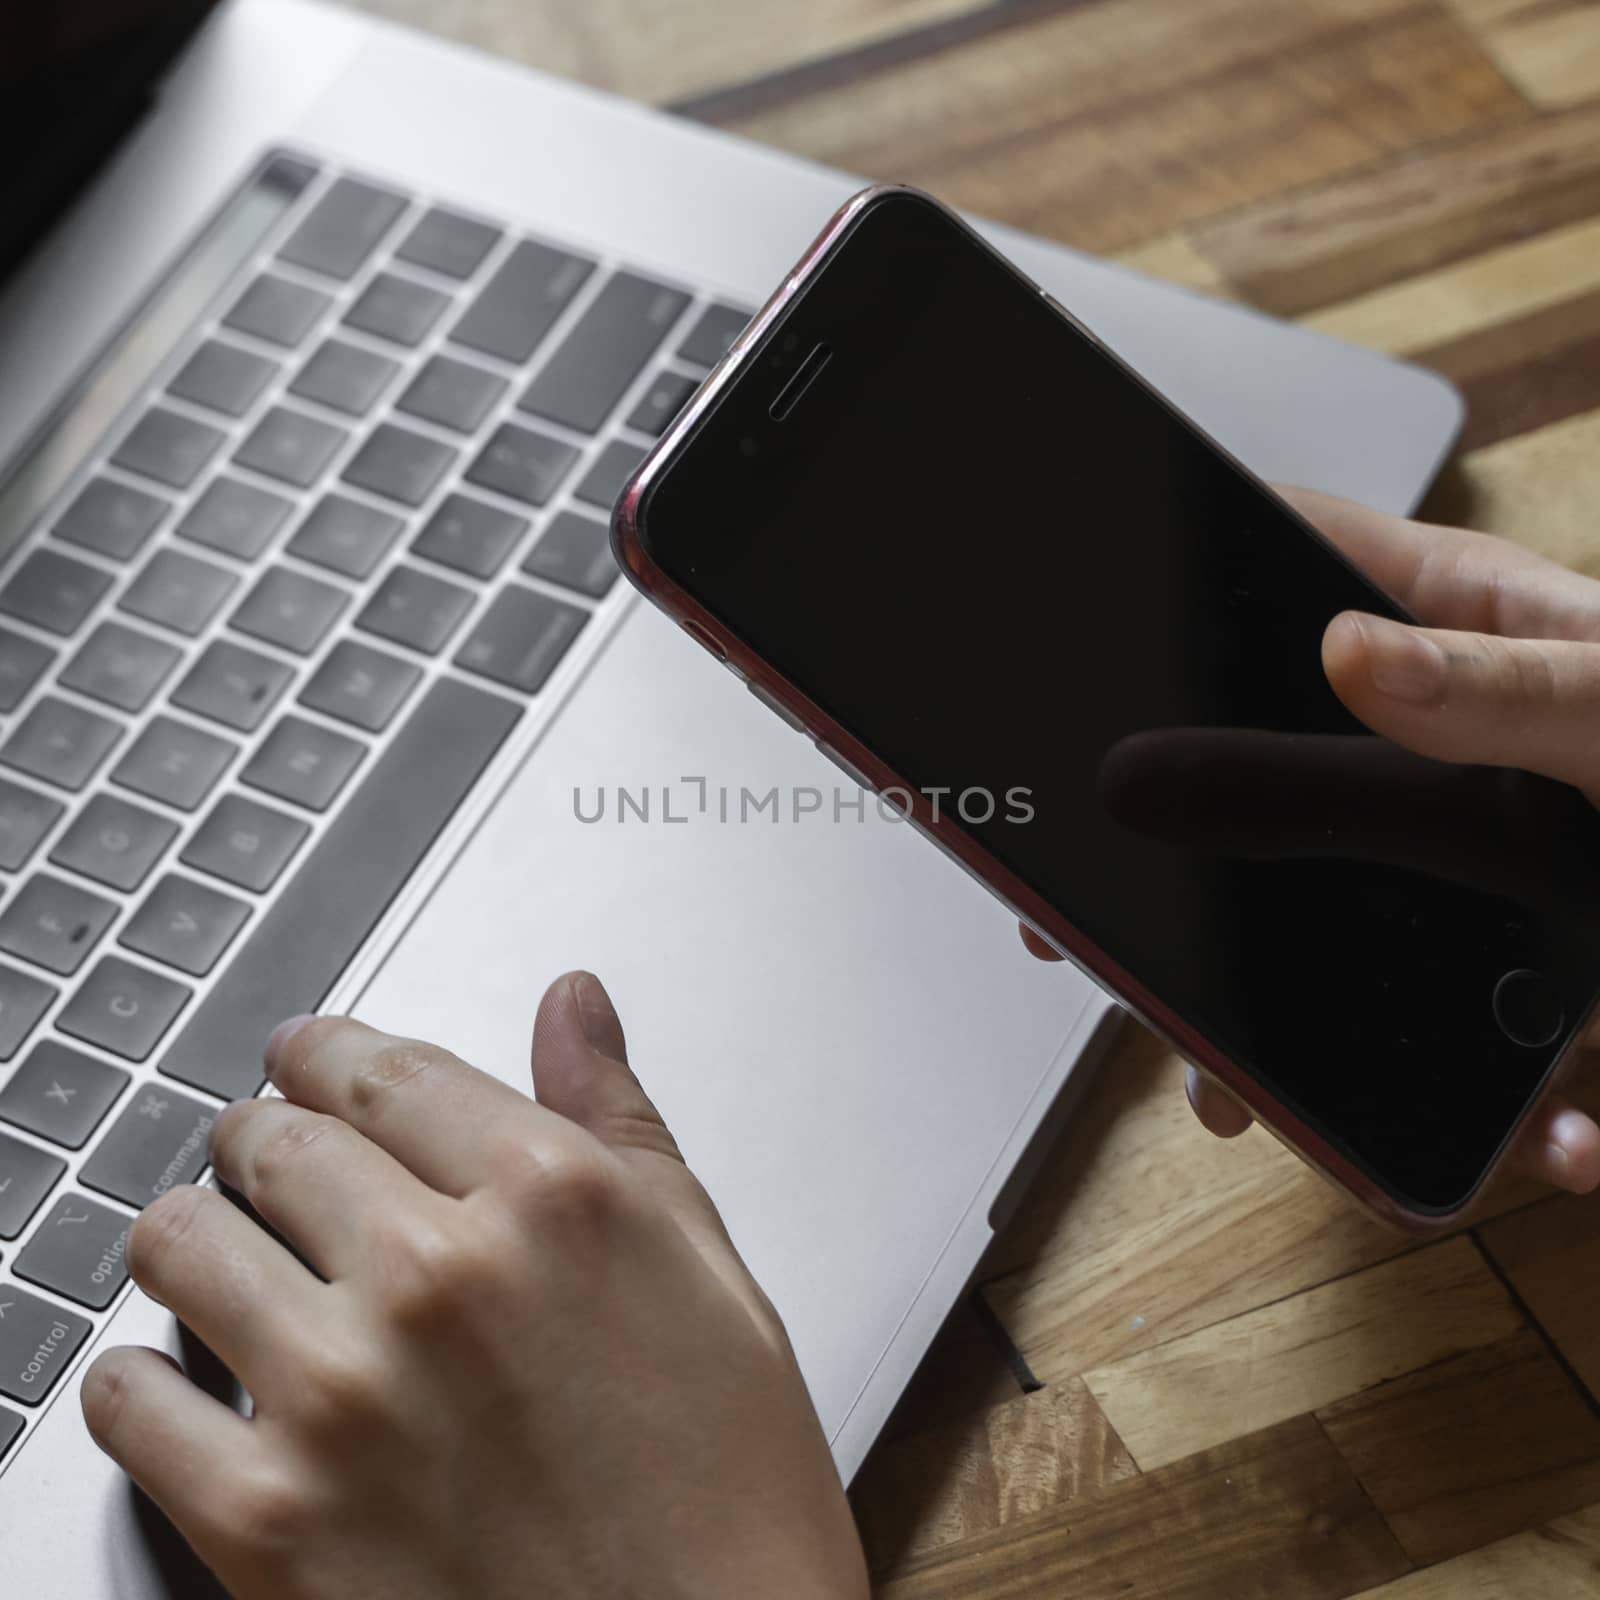 Woman's hands use a smartphone with a laptop. Study and work online, freelance. Self employed or freelance woman, girl working with her laptop sitting at wooden table with a phone and ereader